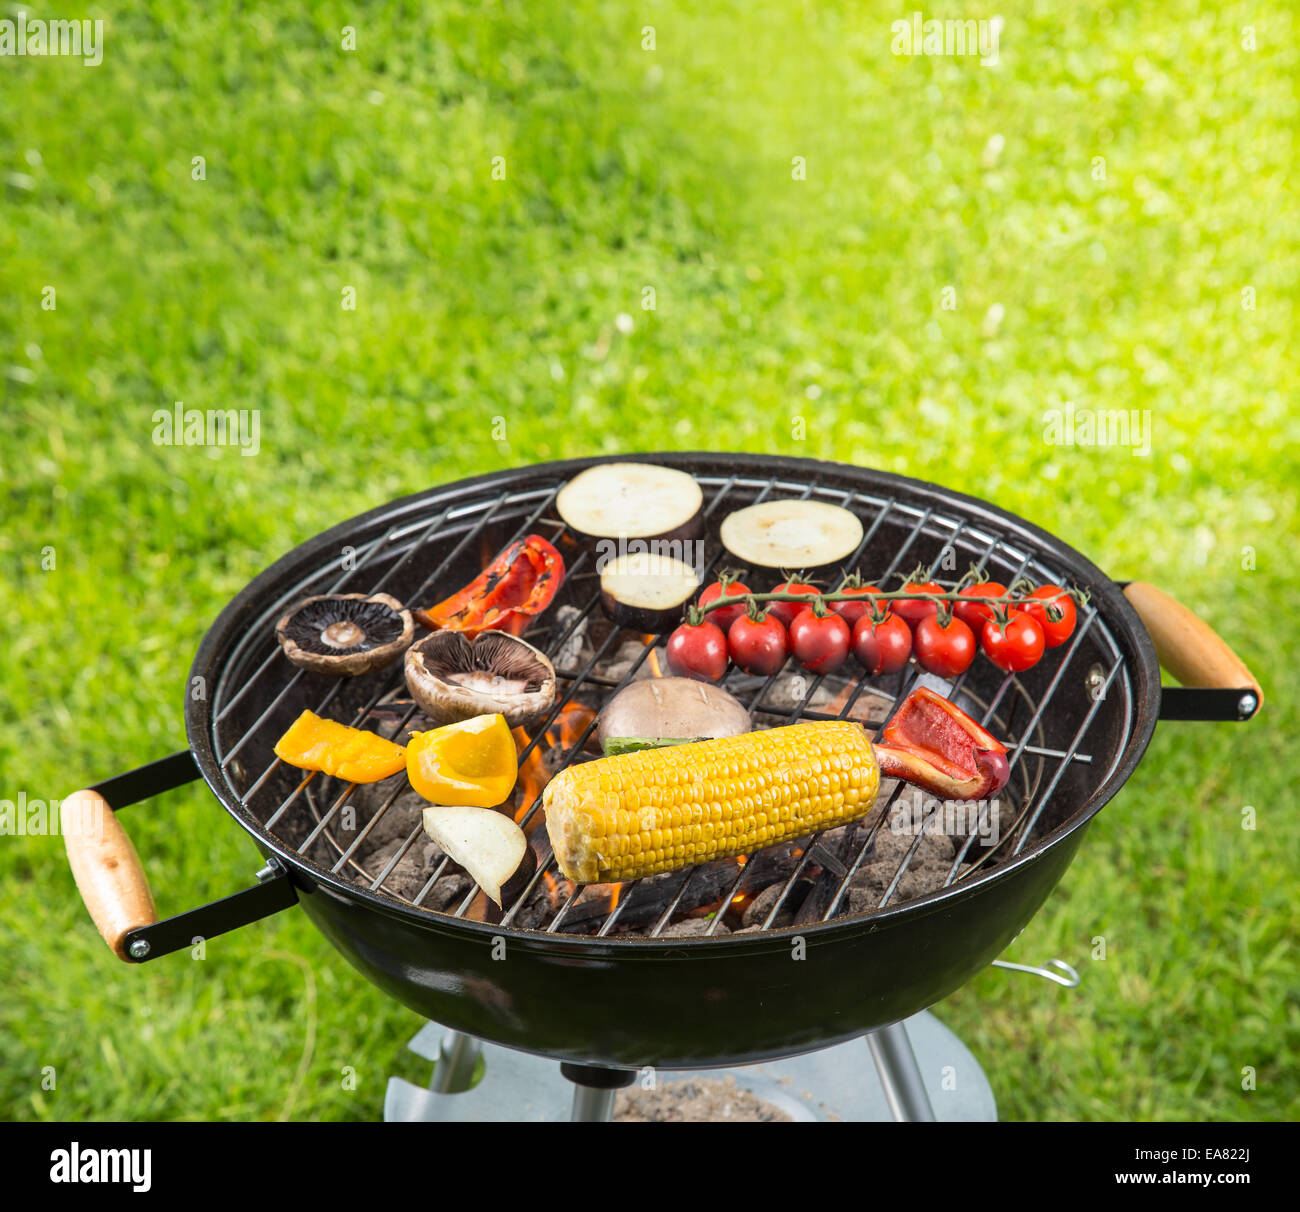 Delicious grilled vegetable on burning coals Stock Photo